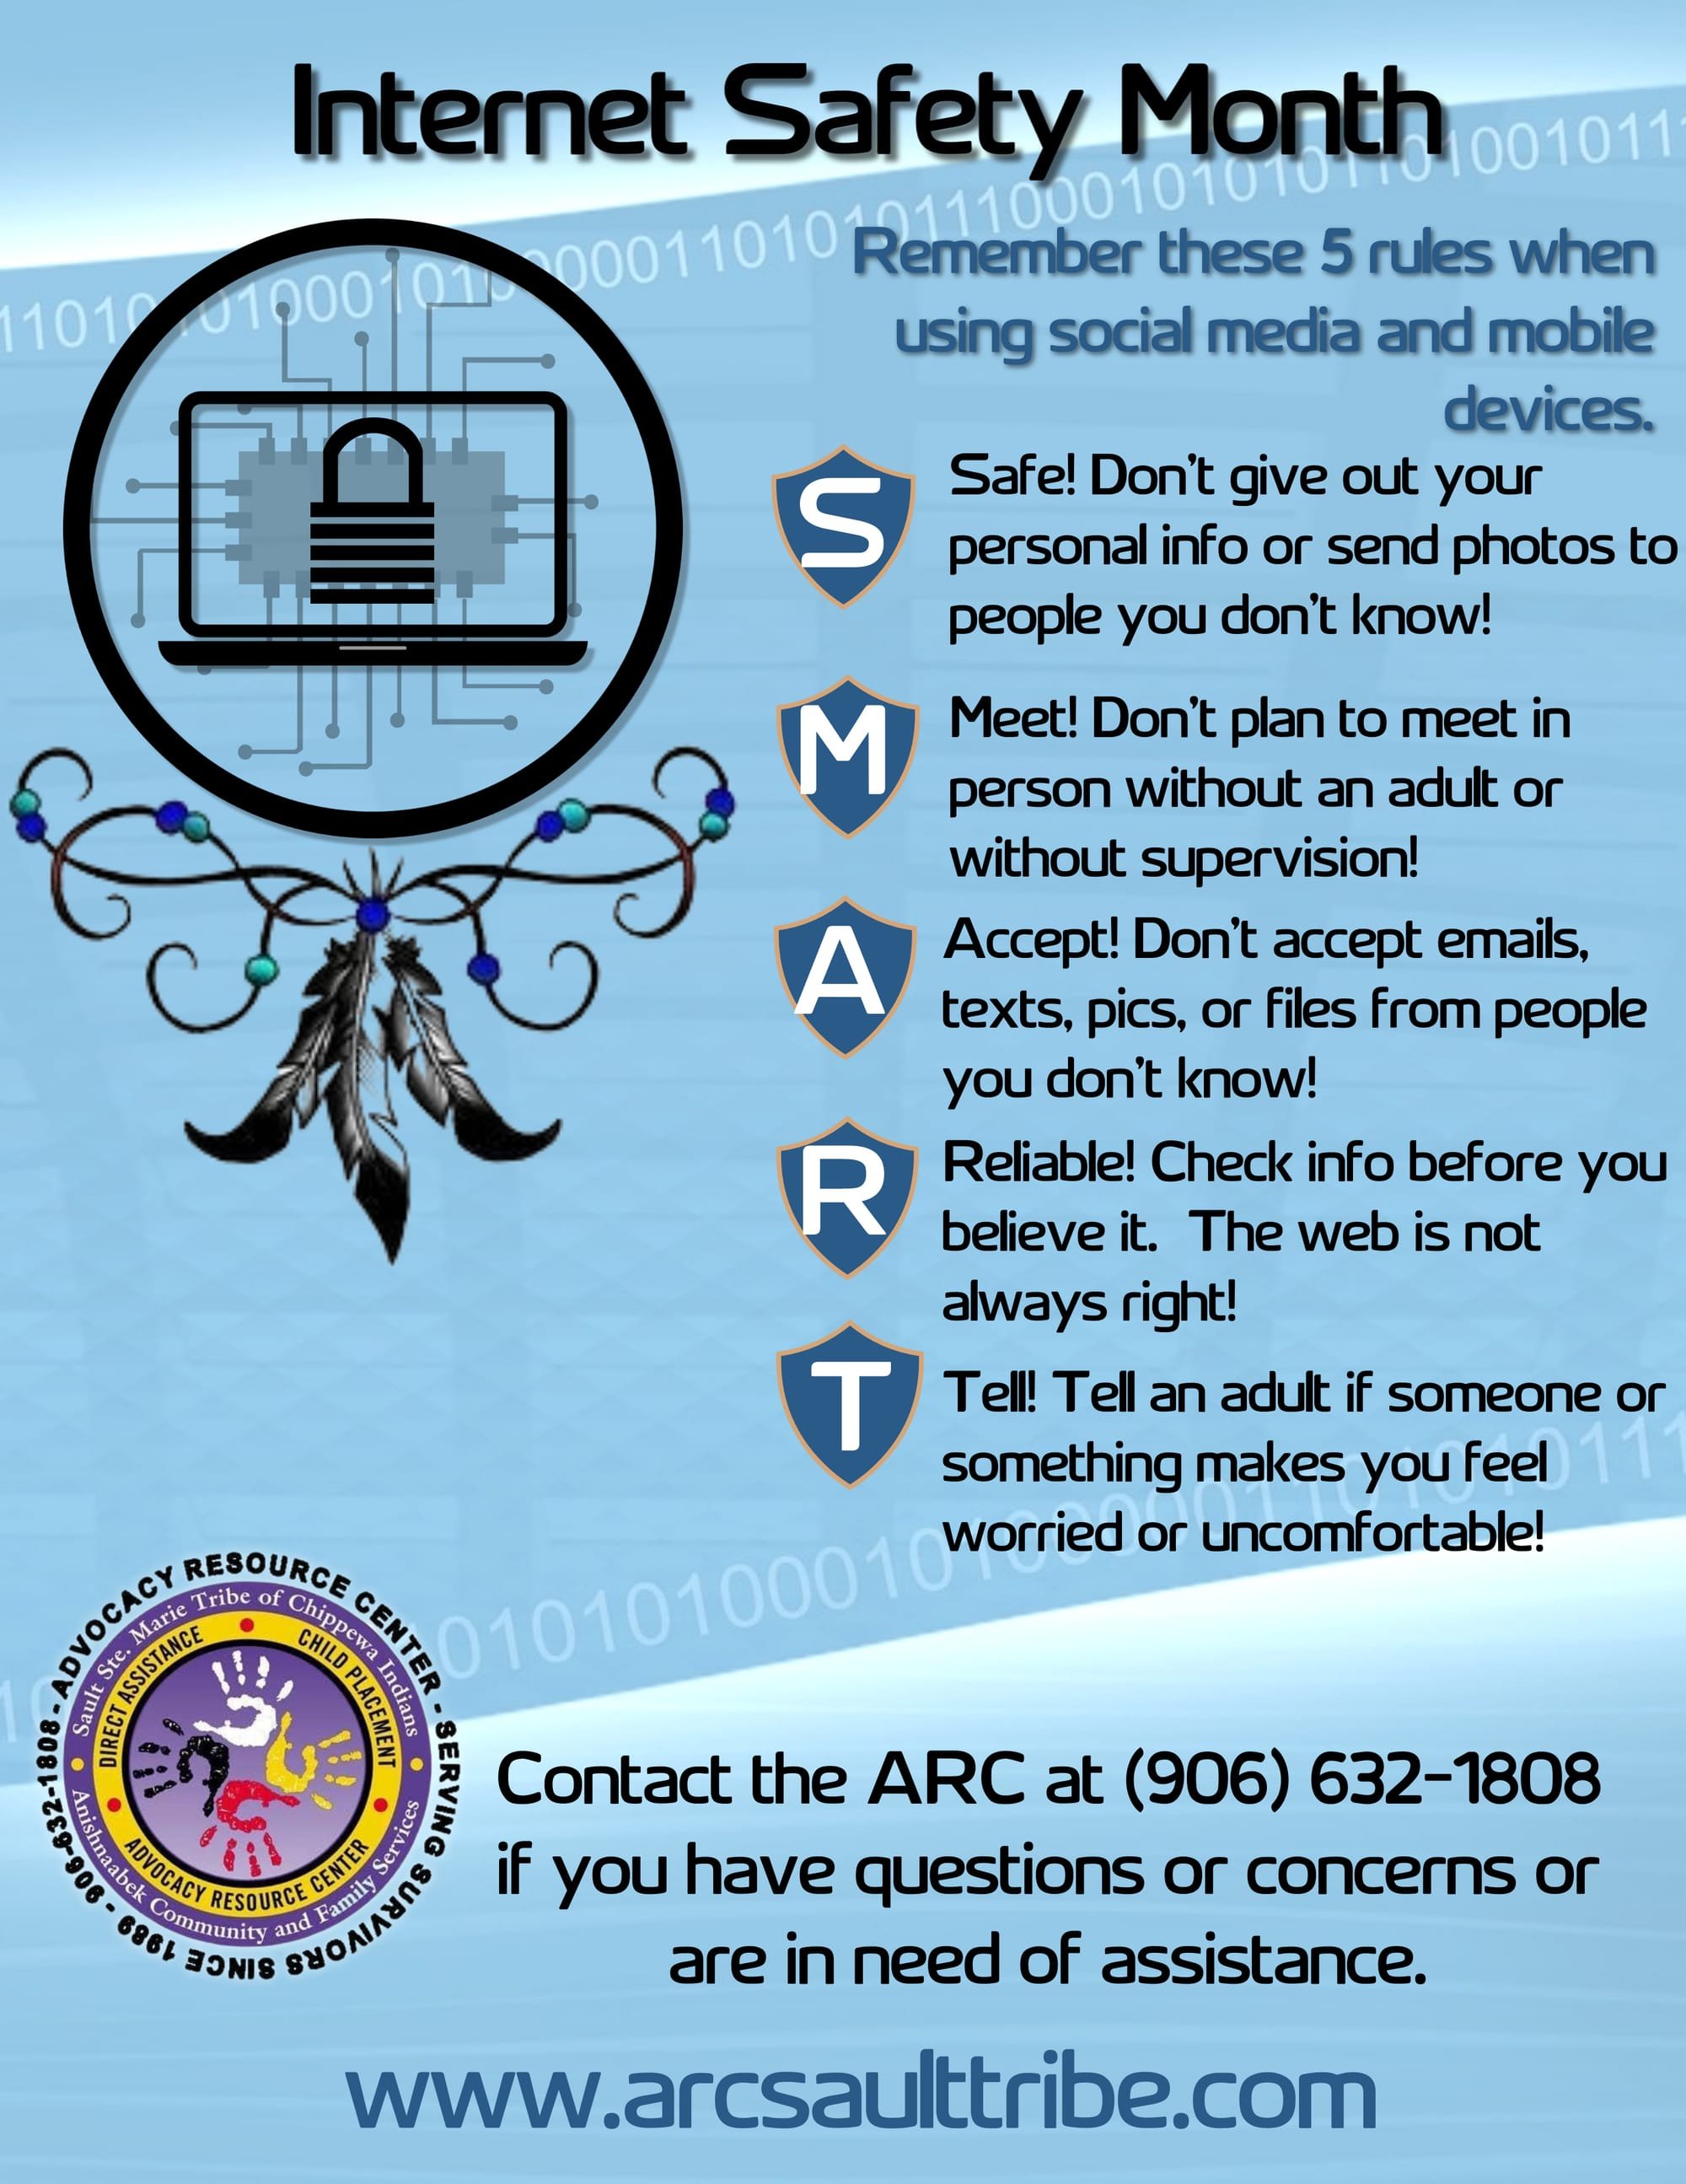 July is Internet Safety Month